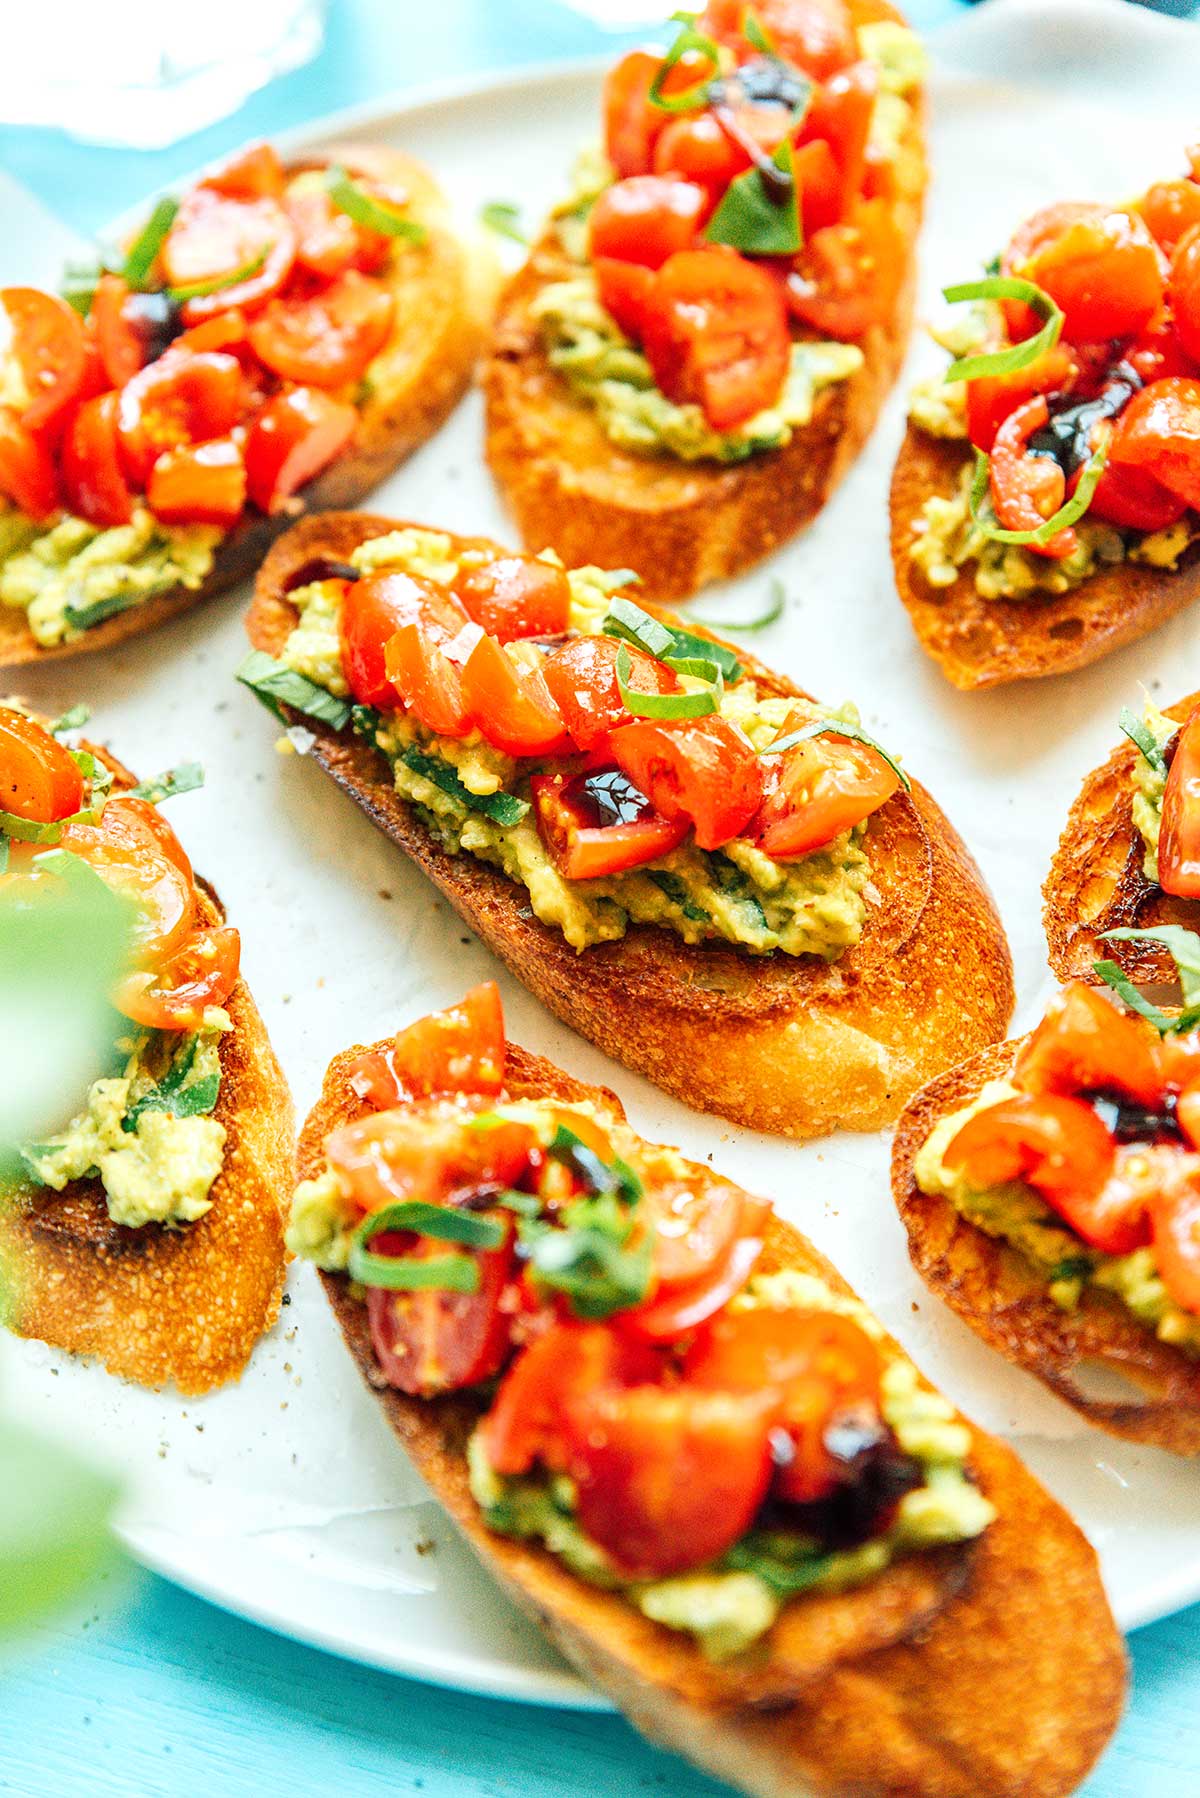 A close up view detailing the texture of avocado bruschetta